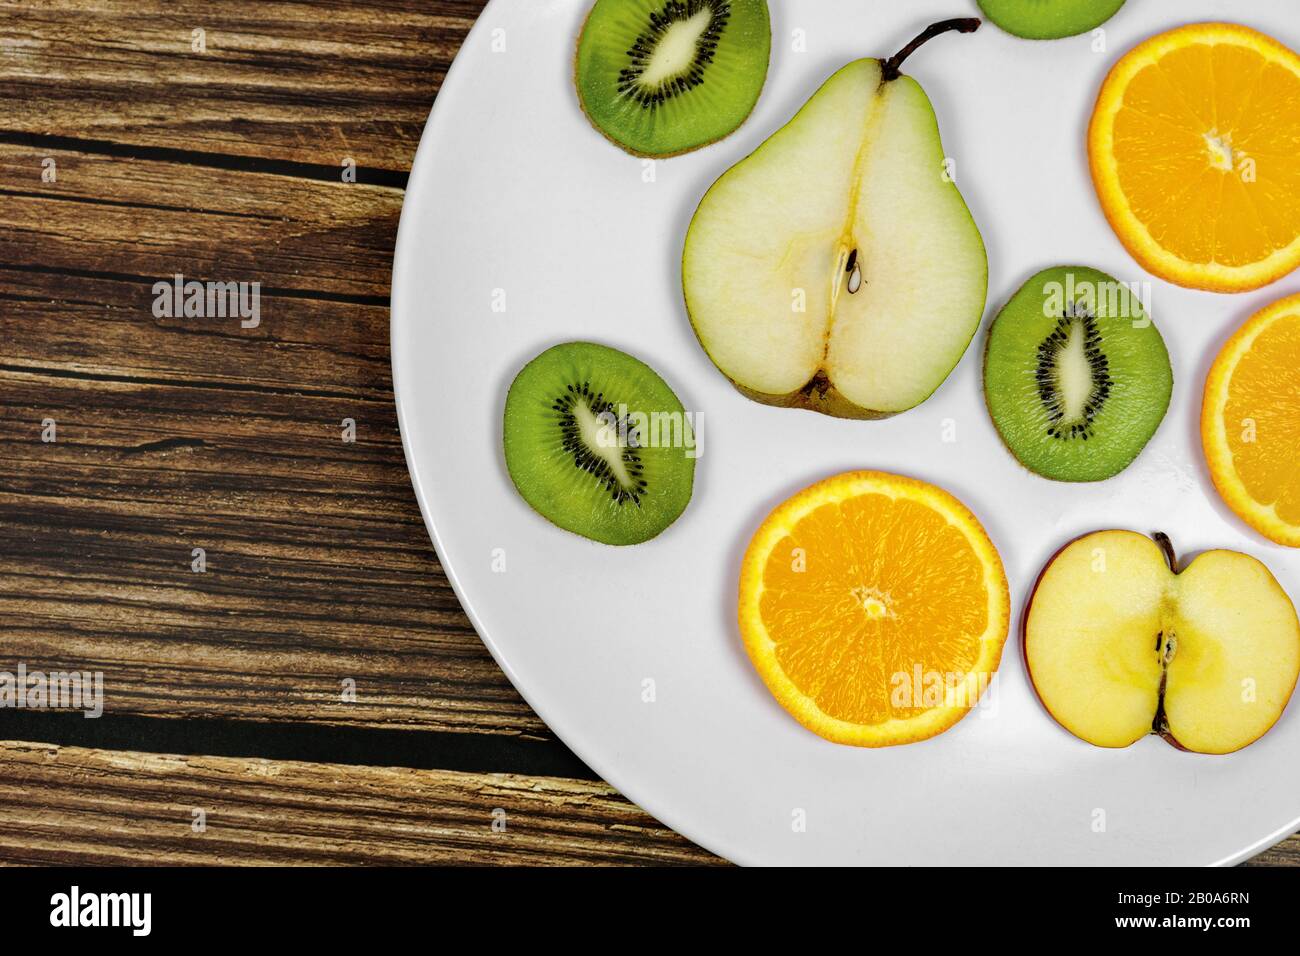 sliced fruits pear kiwi orange apple on a white plate witg rustic wooden background Stock Photo